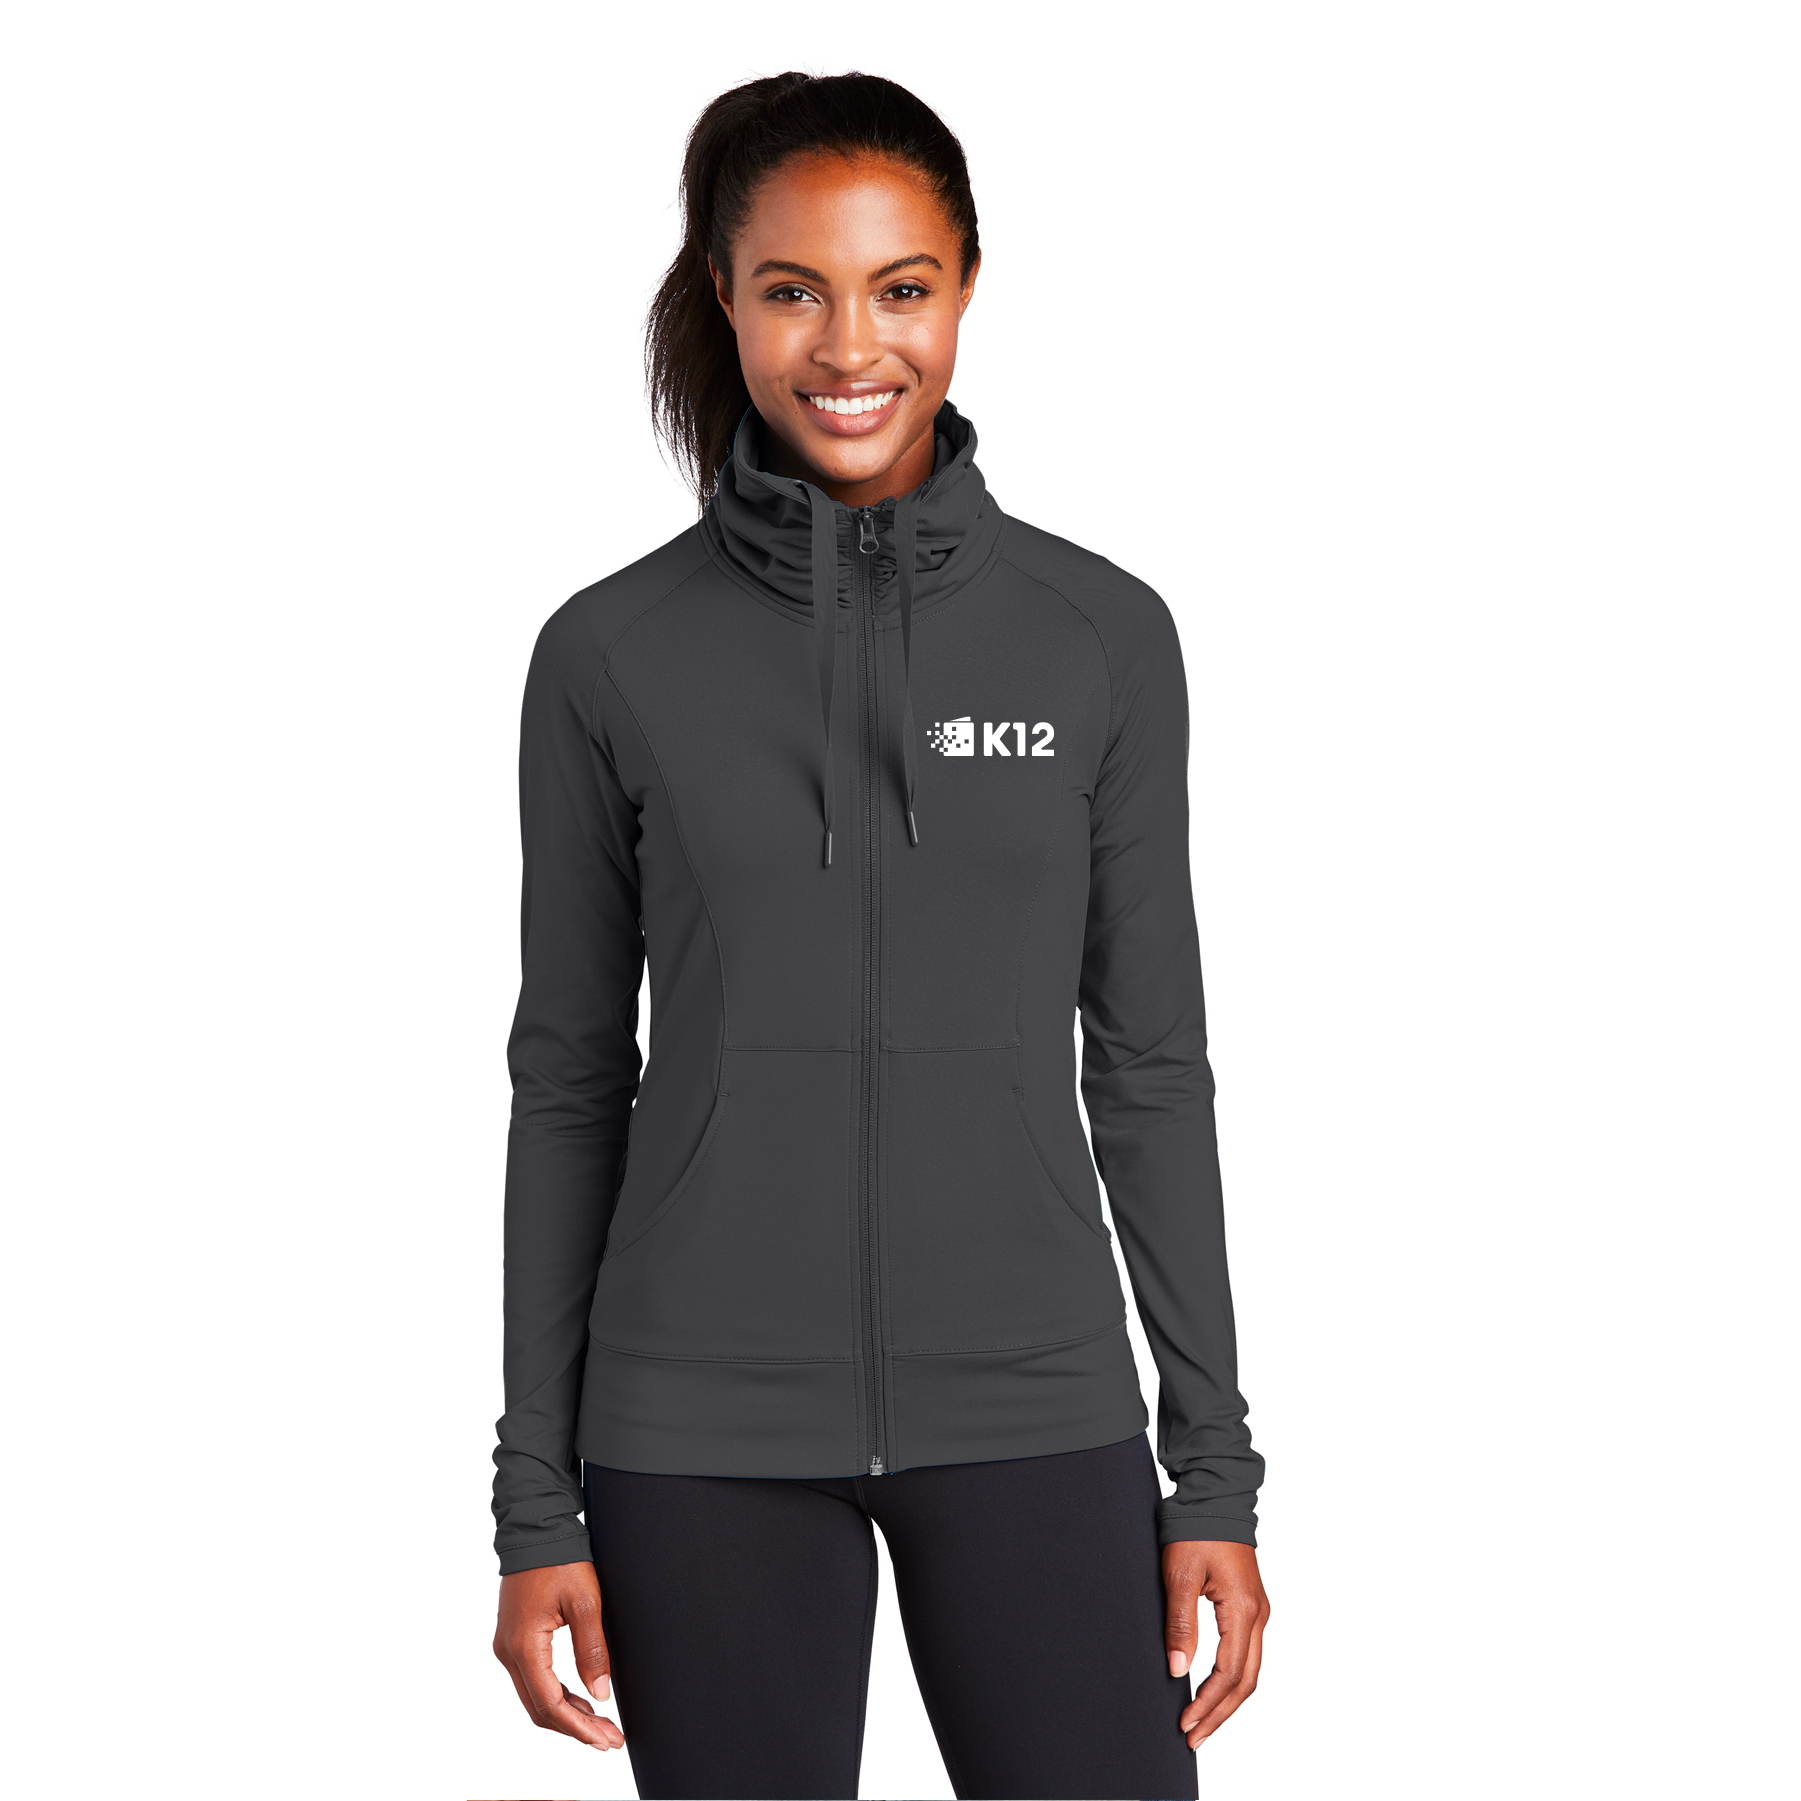 K12 EMBROIDERED SPORT-WICK STRETCH FULL-ZIP JACKET